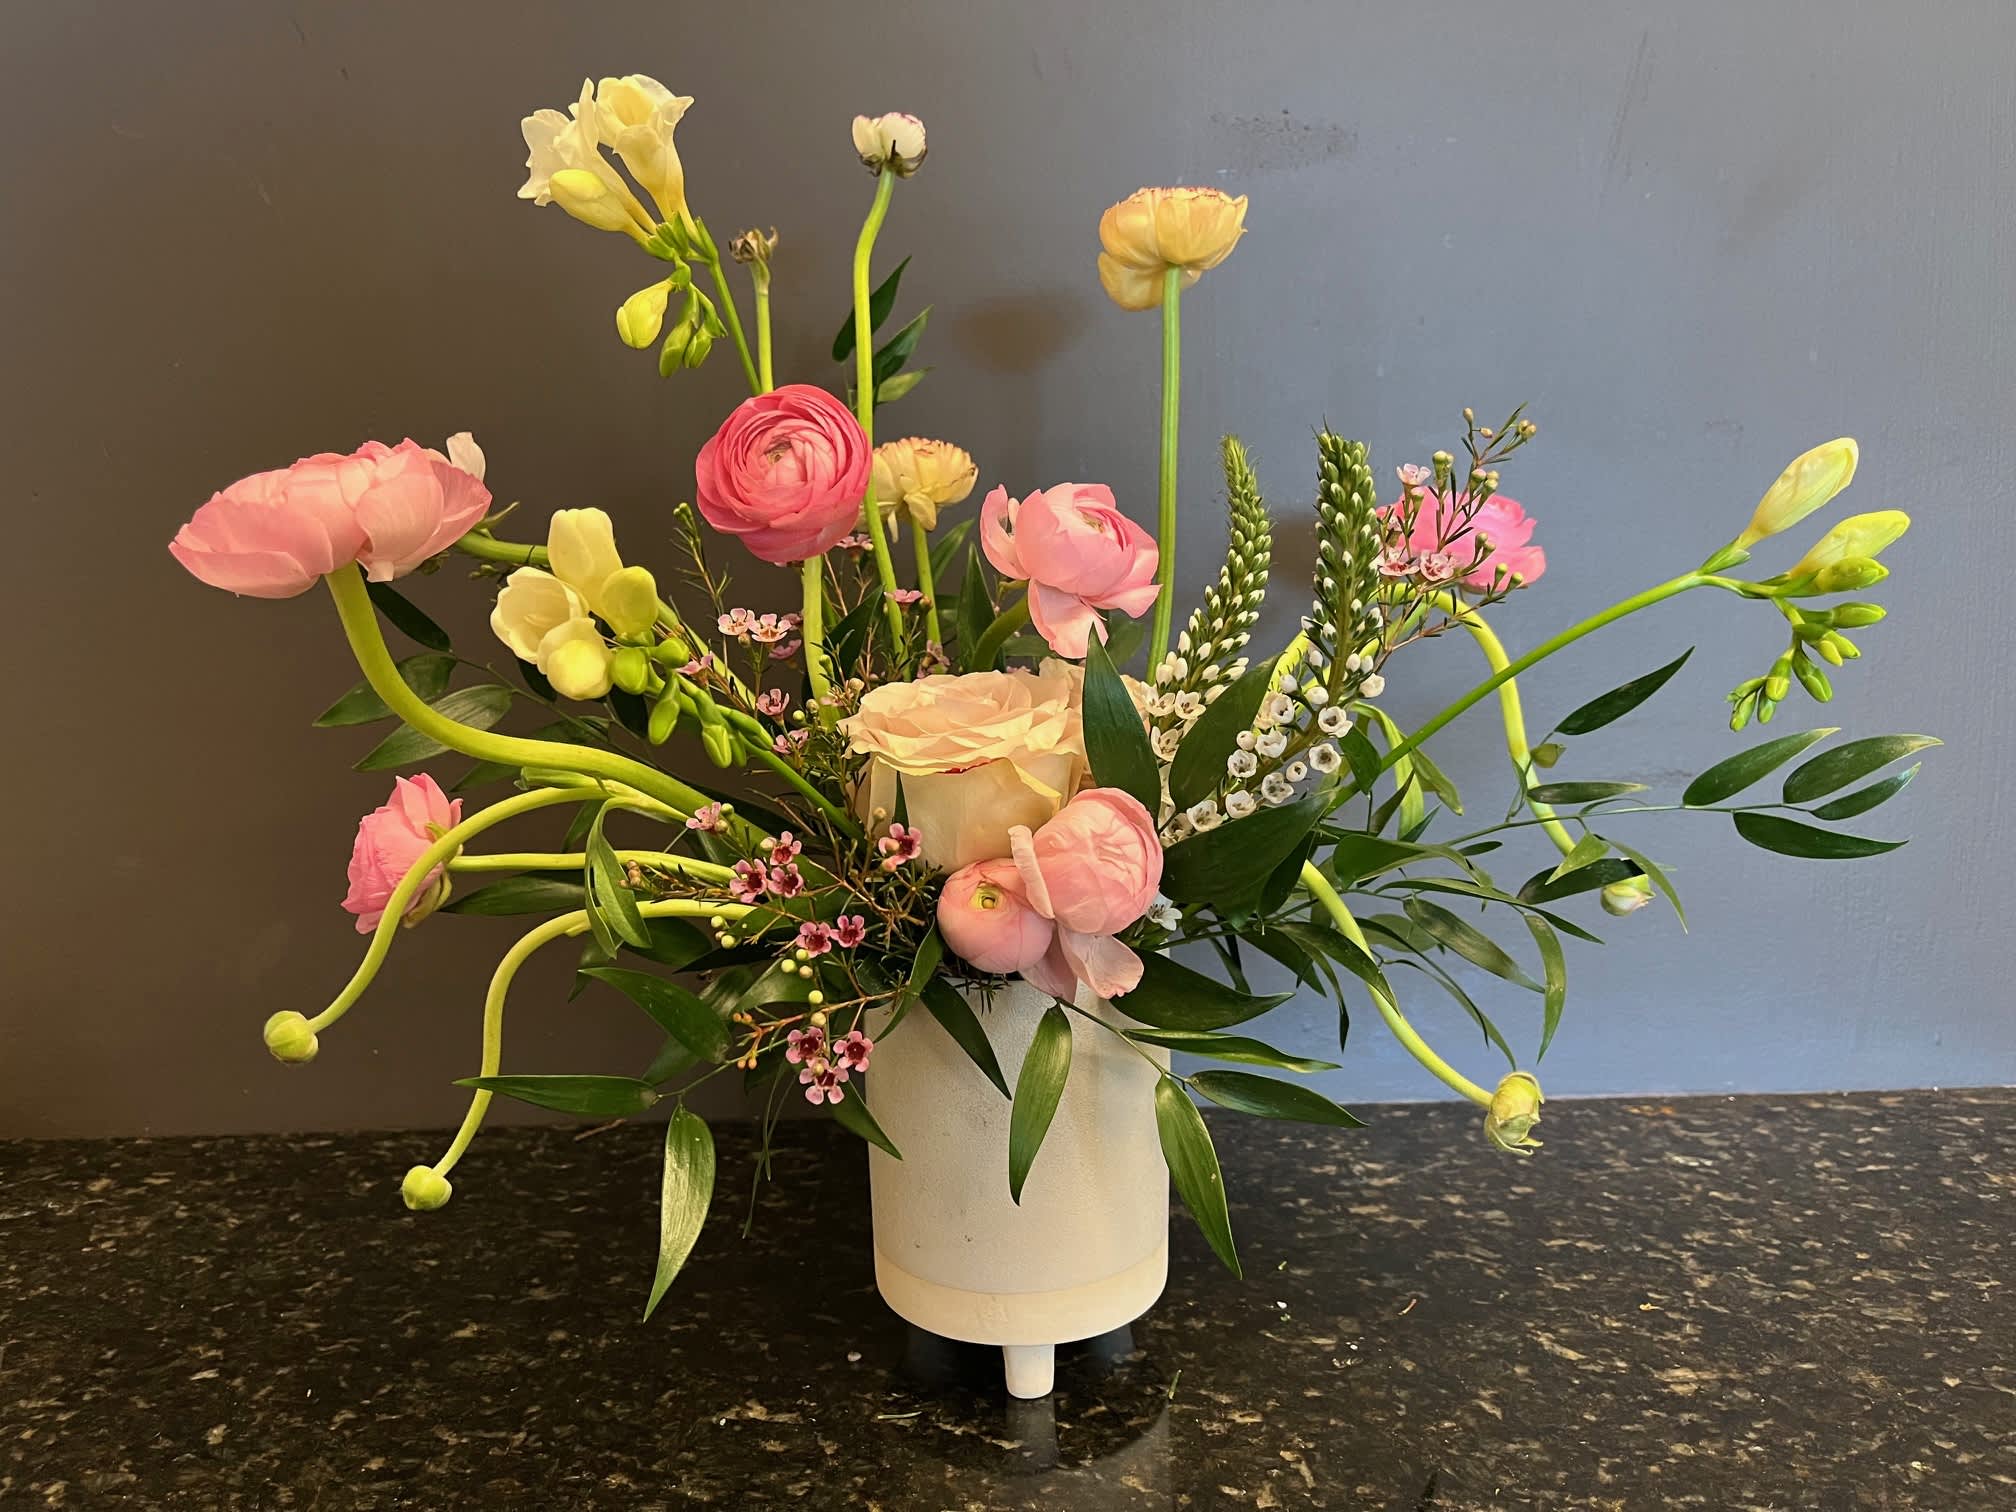 Miss Whimsy  - we have a delightful, fun and airy arrangement with Ranunculus, Roses, Freesia and other floral accents in a cream color ceramic footed container.   